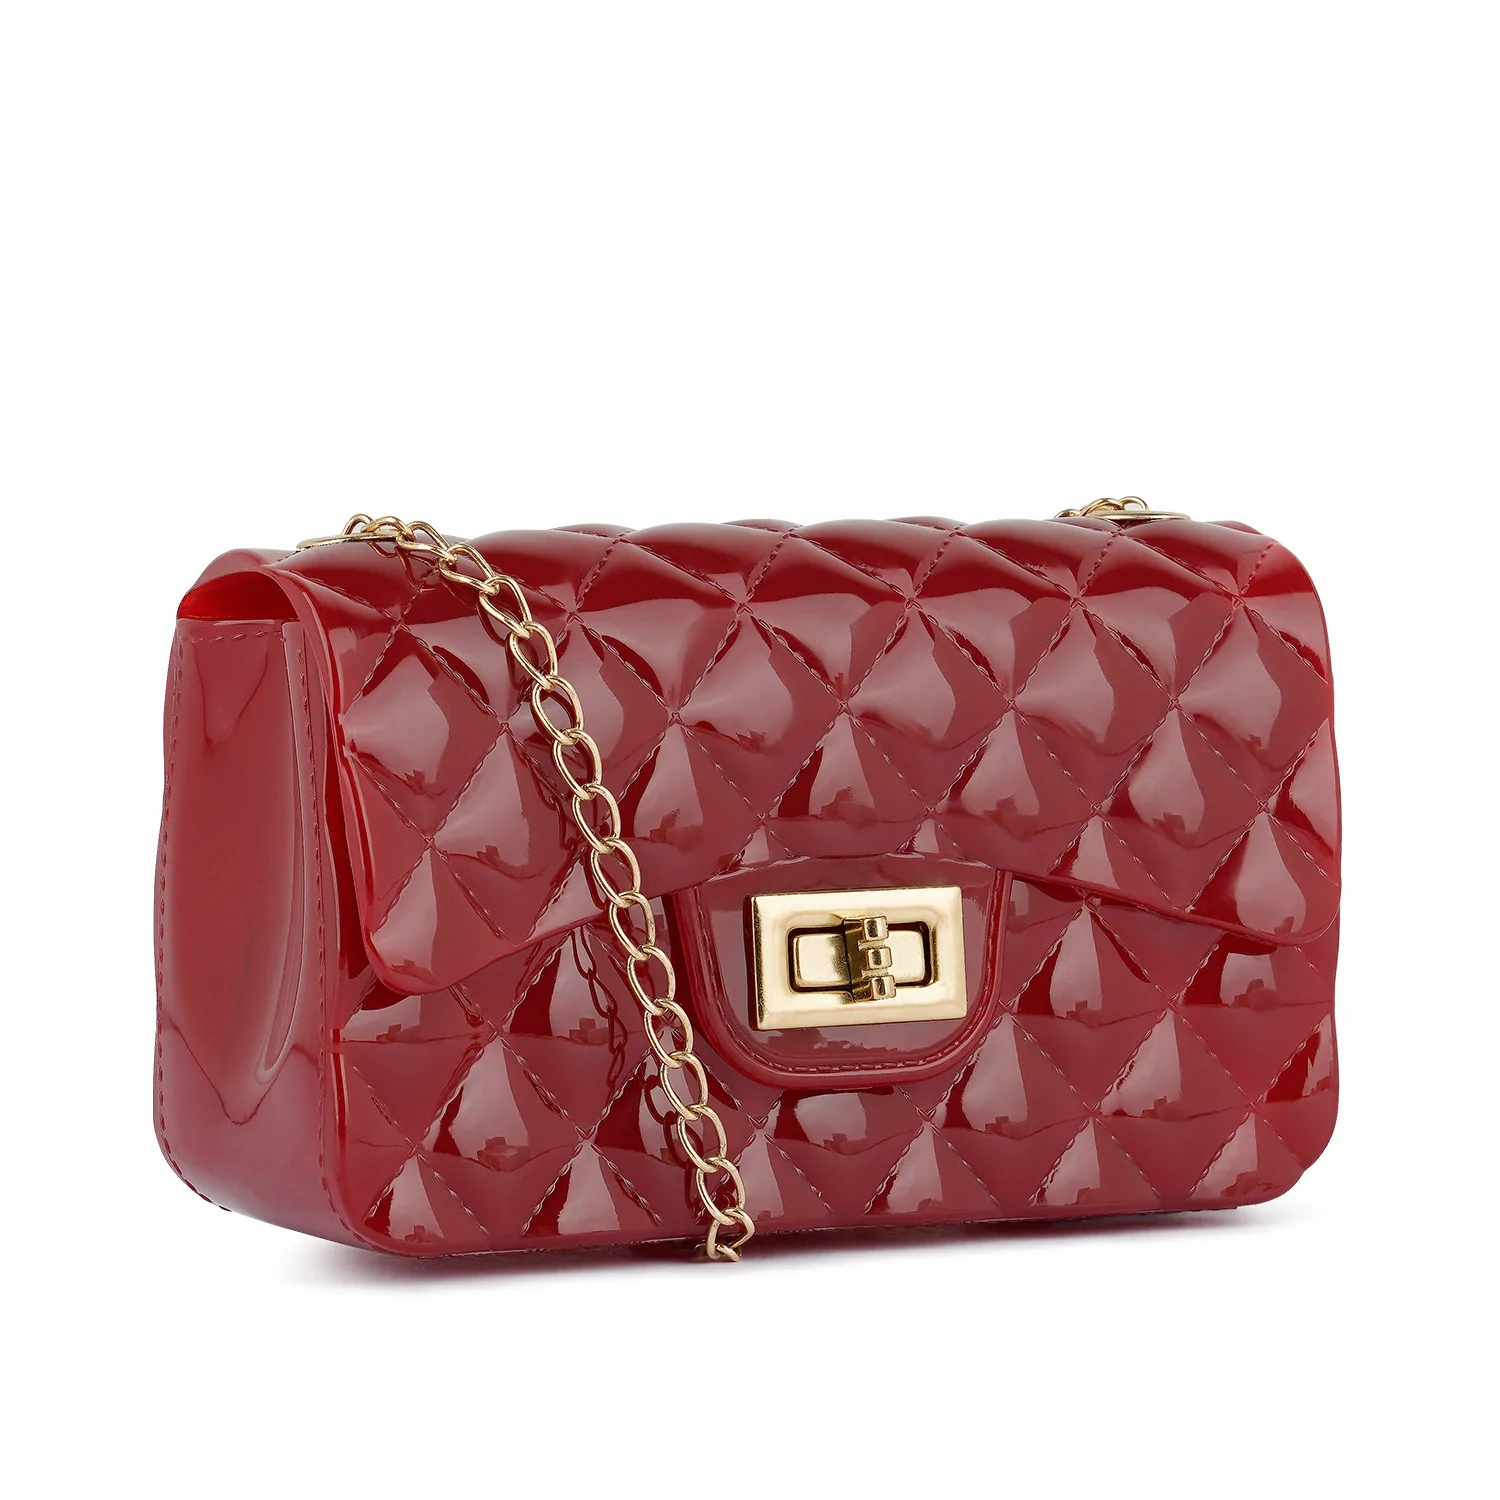 JELLY QUILTED RECTANGULAR SLING BAG IN RED